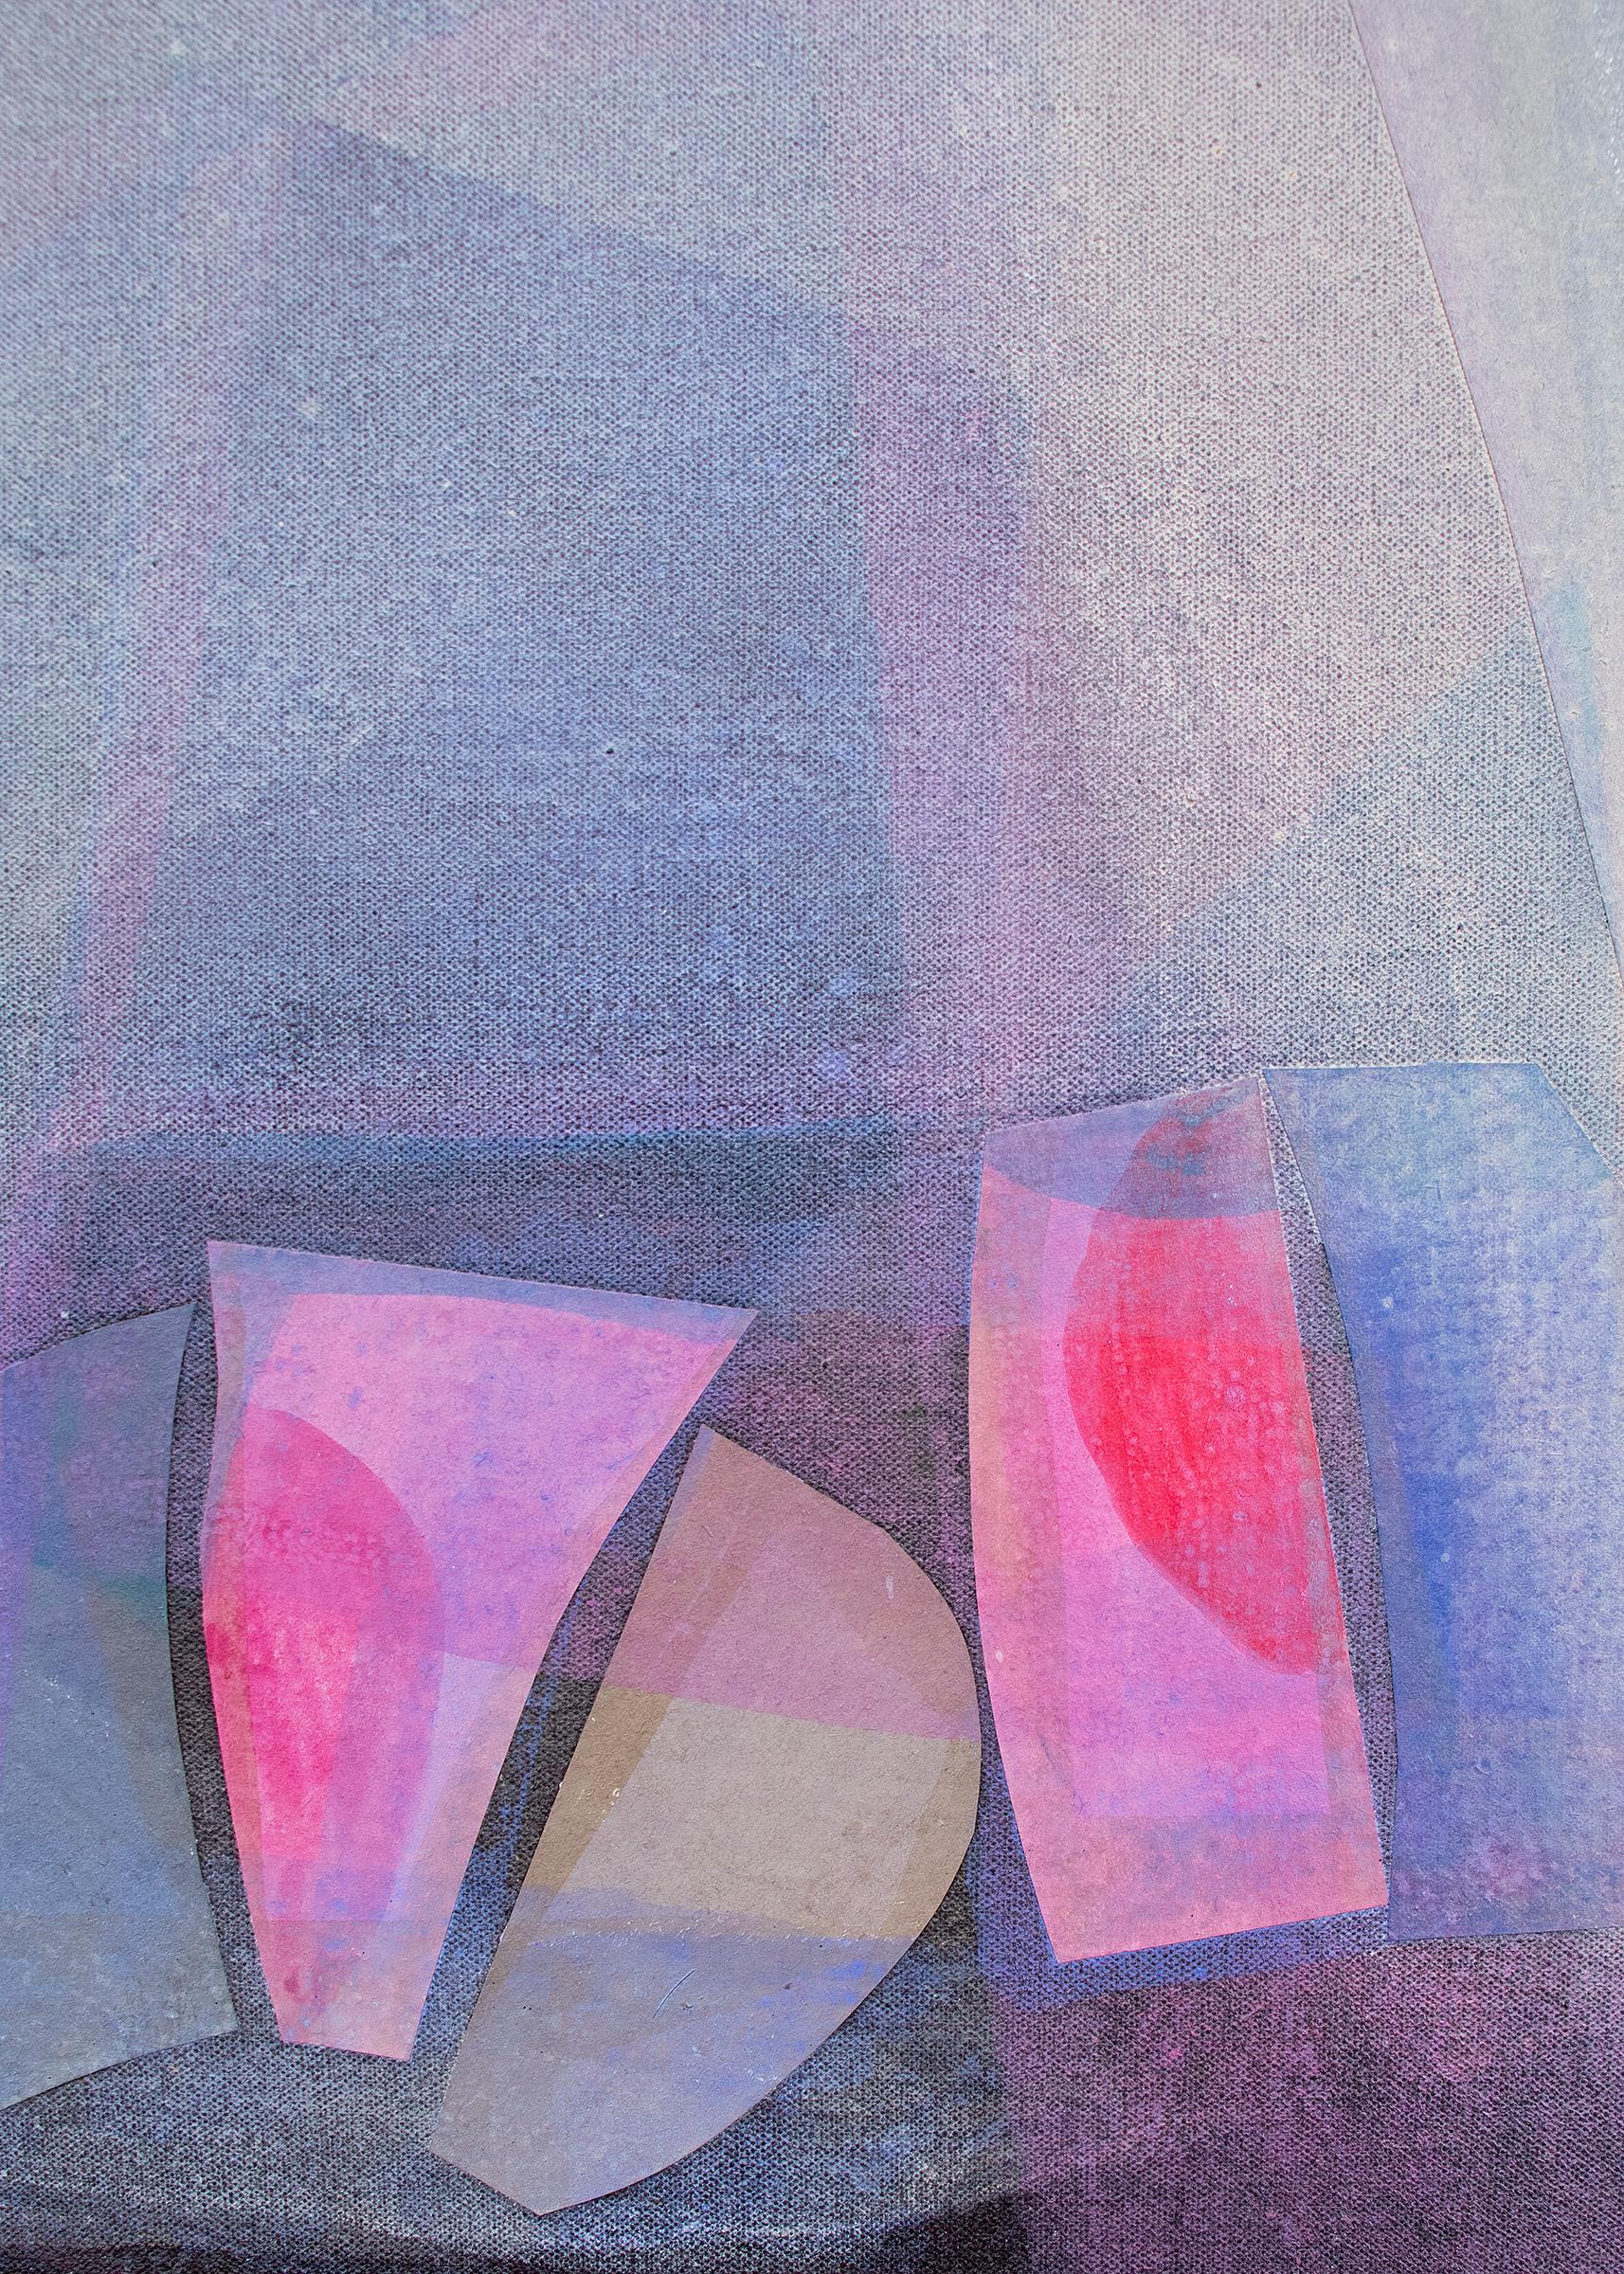 Duet, Original Abstract Figures in Purple, Pink and Blue Acrylic and Crayon - Gray Abstract Painting by Margo Hoff